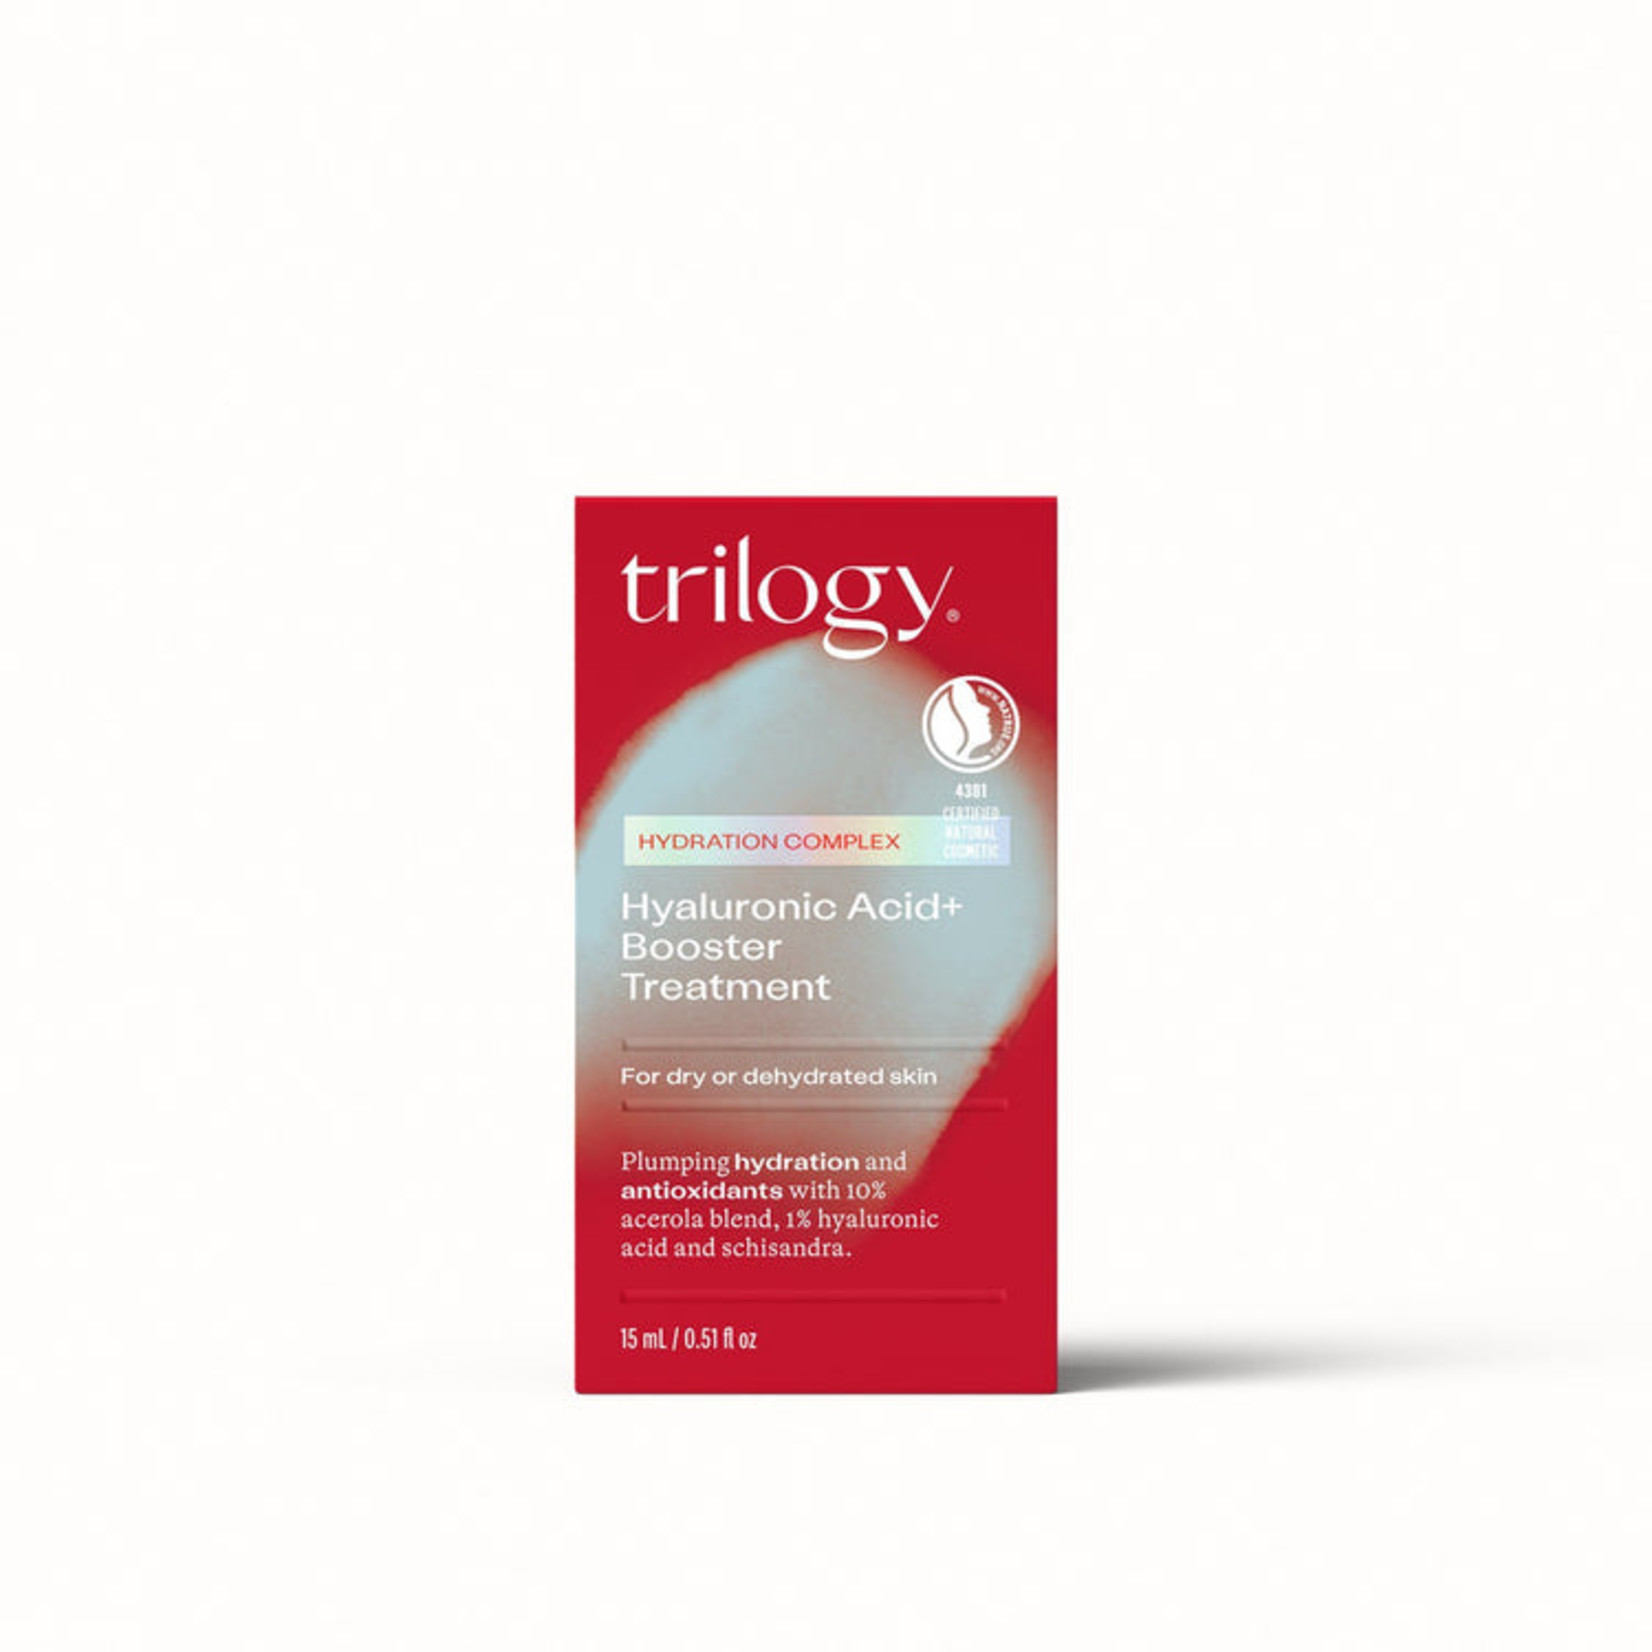 Trilogy Trilogy - Hyaluronic Acid+ Booster Treatment - 15 ml